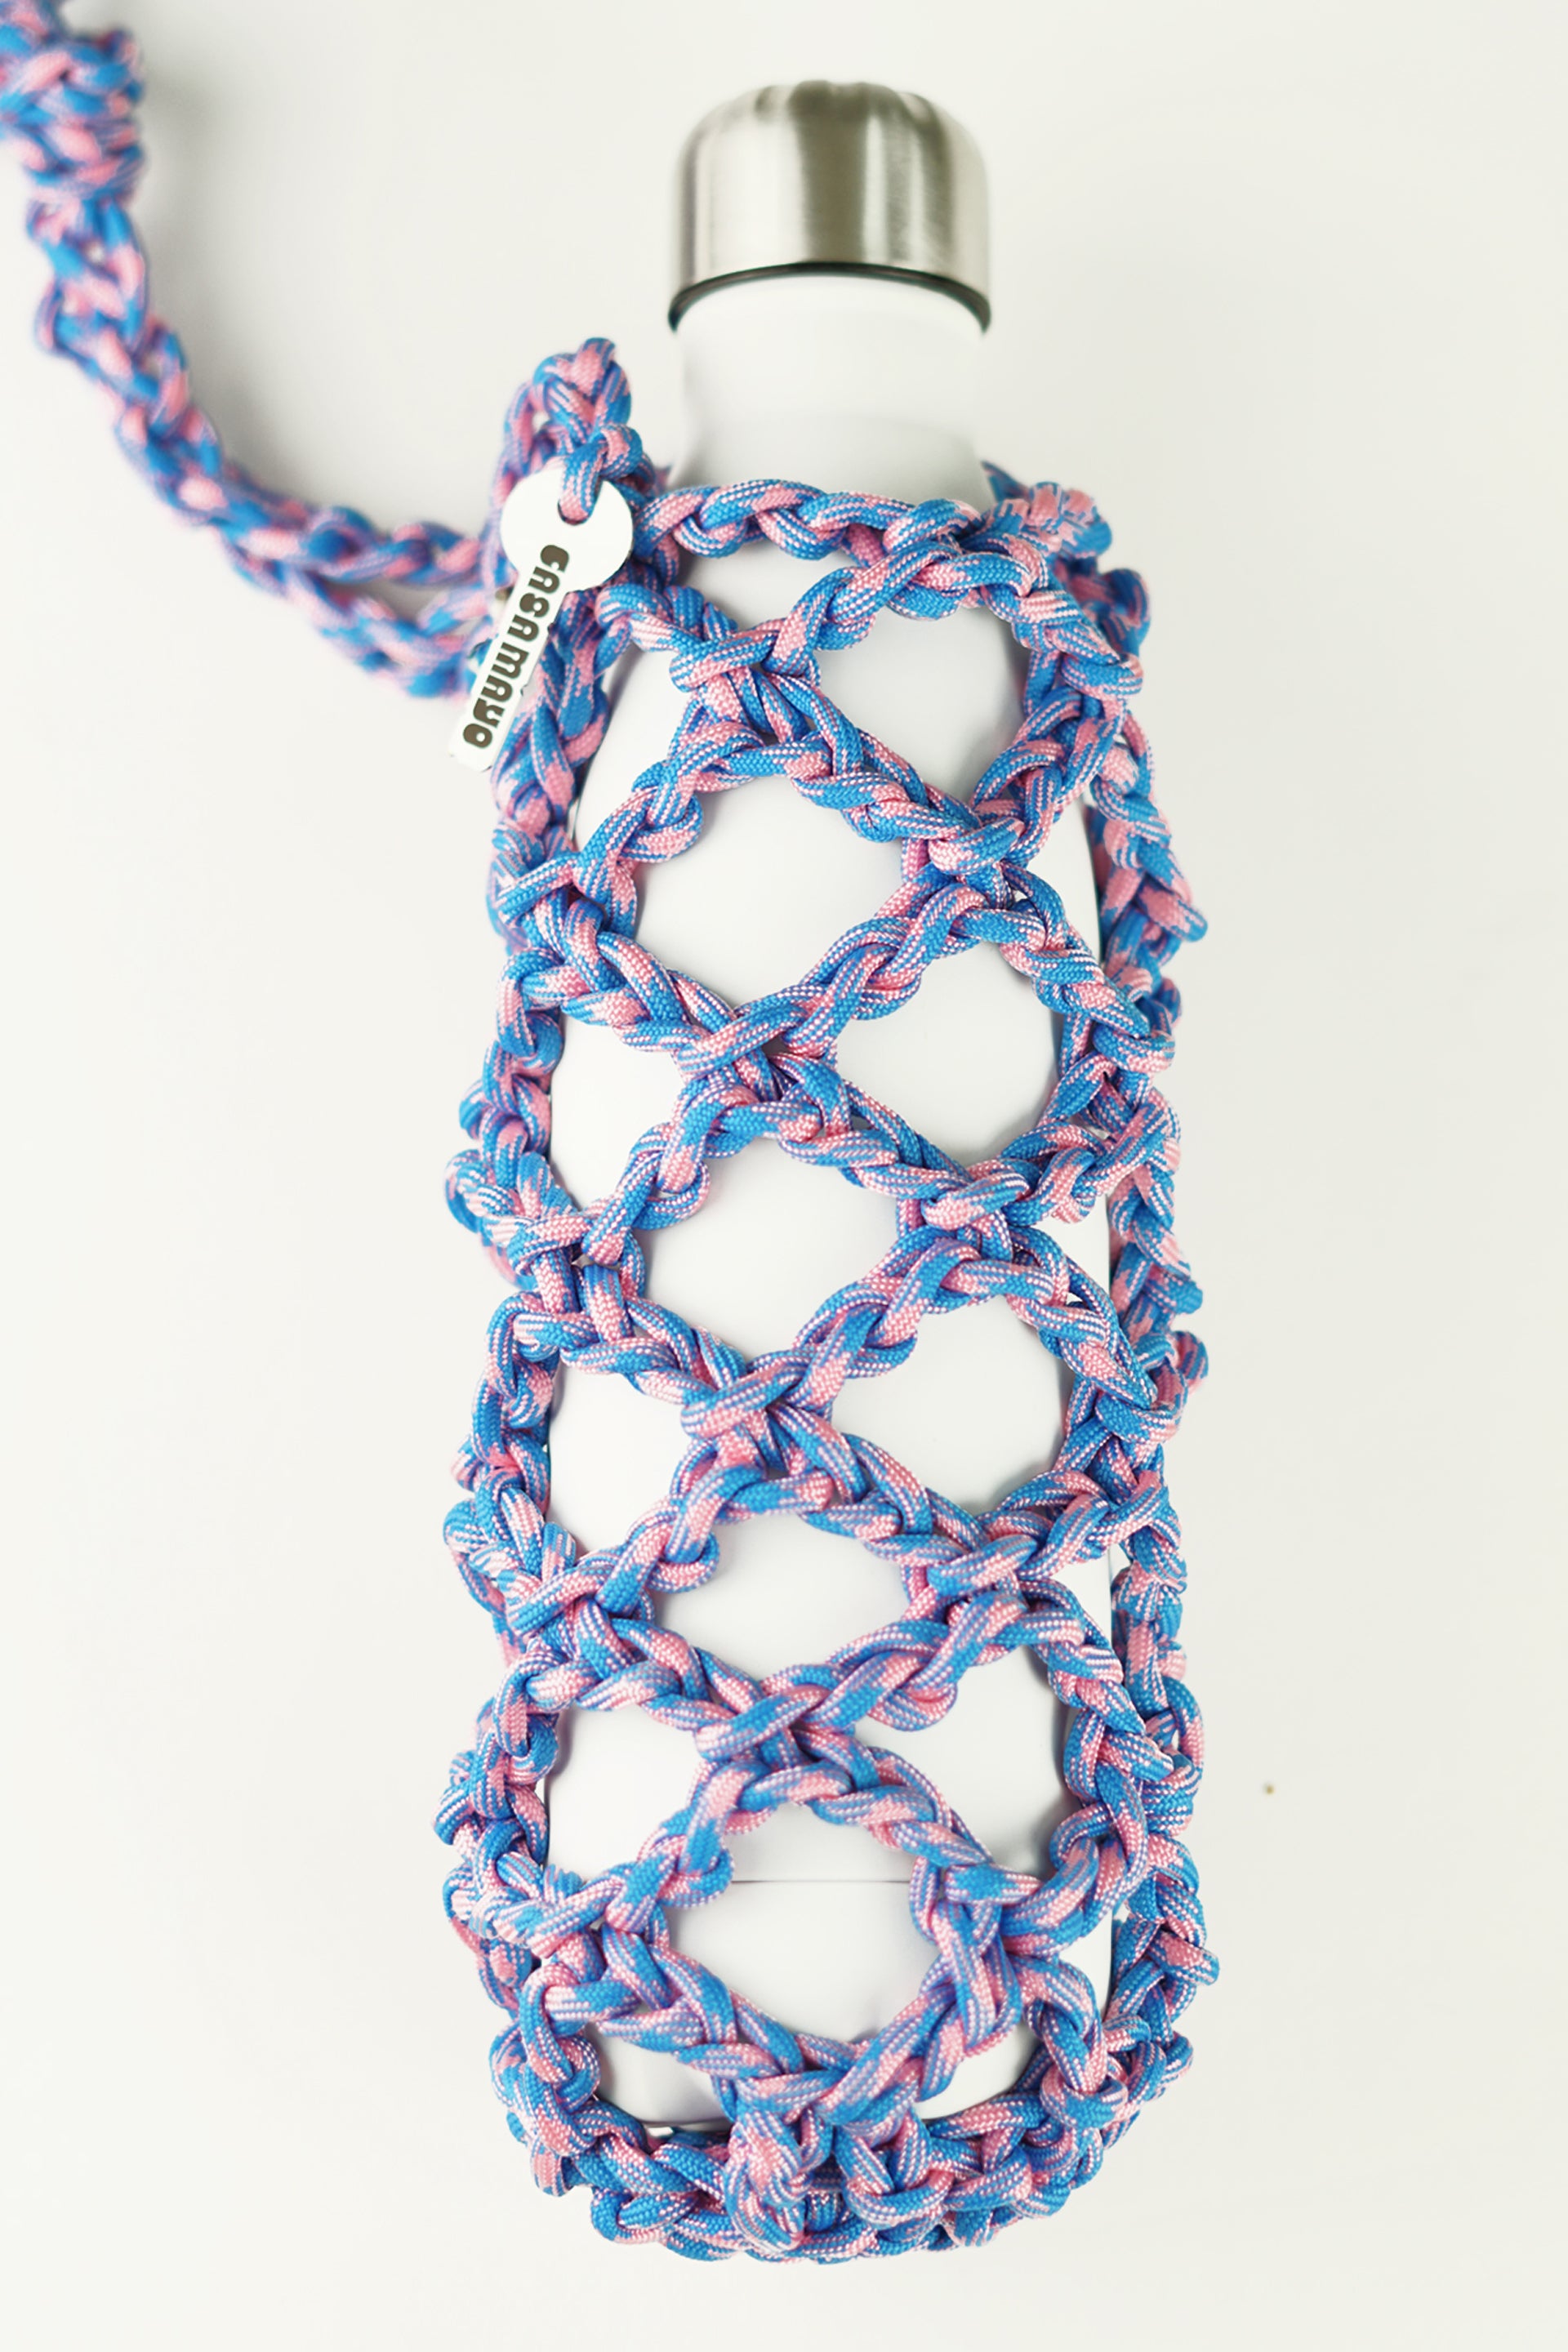 Pink and blue bottle porter made of paracord rope